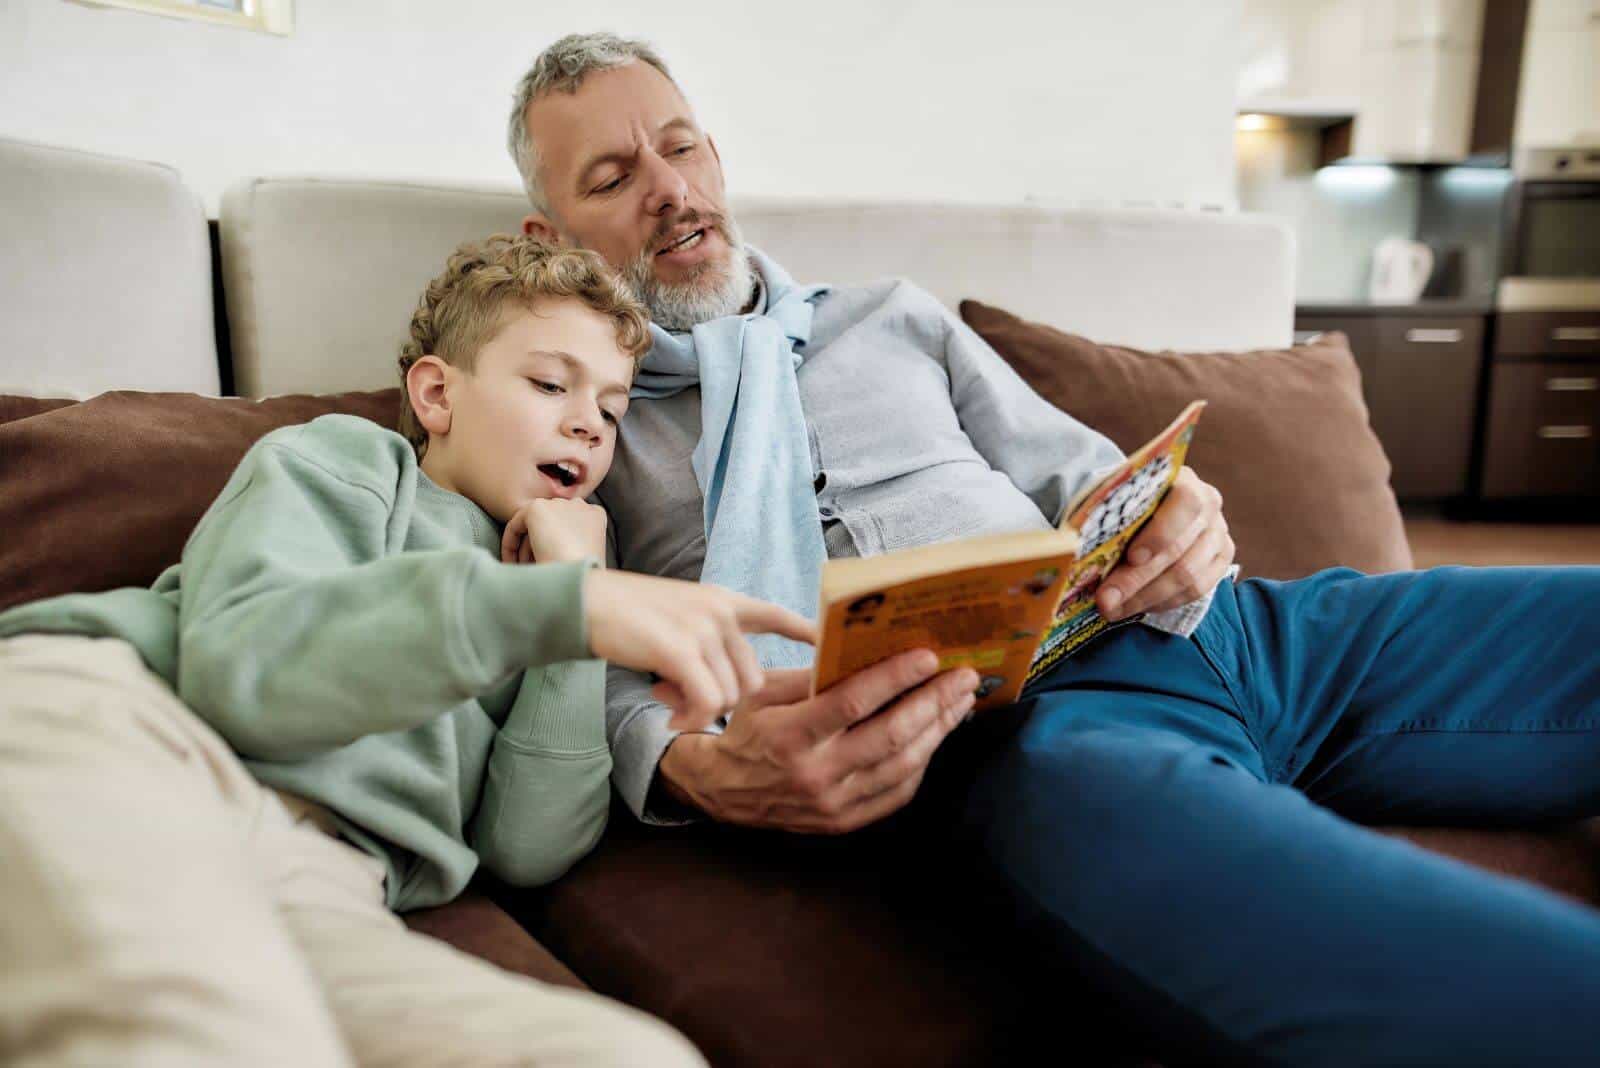 grandfather reading book to grandchild while the grandchild points at page